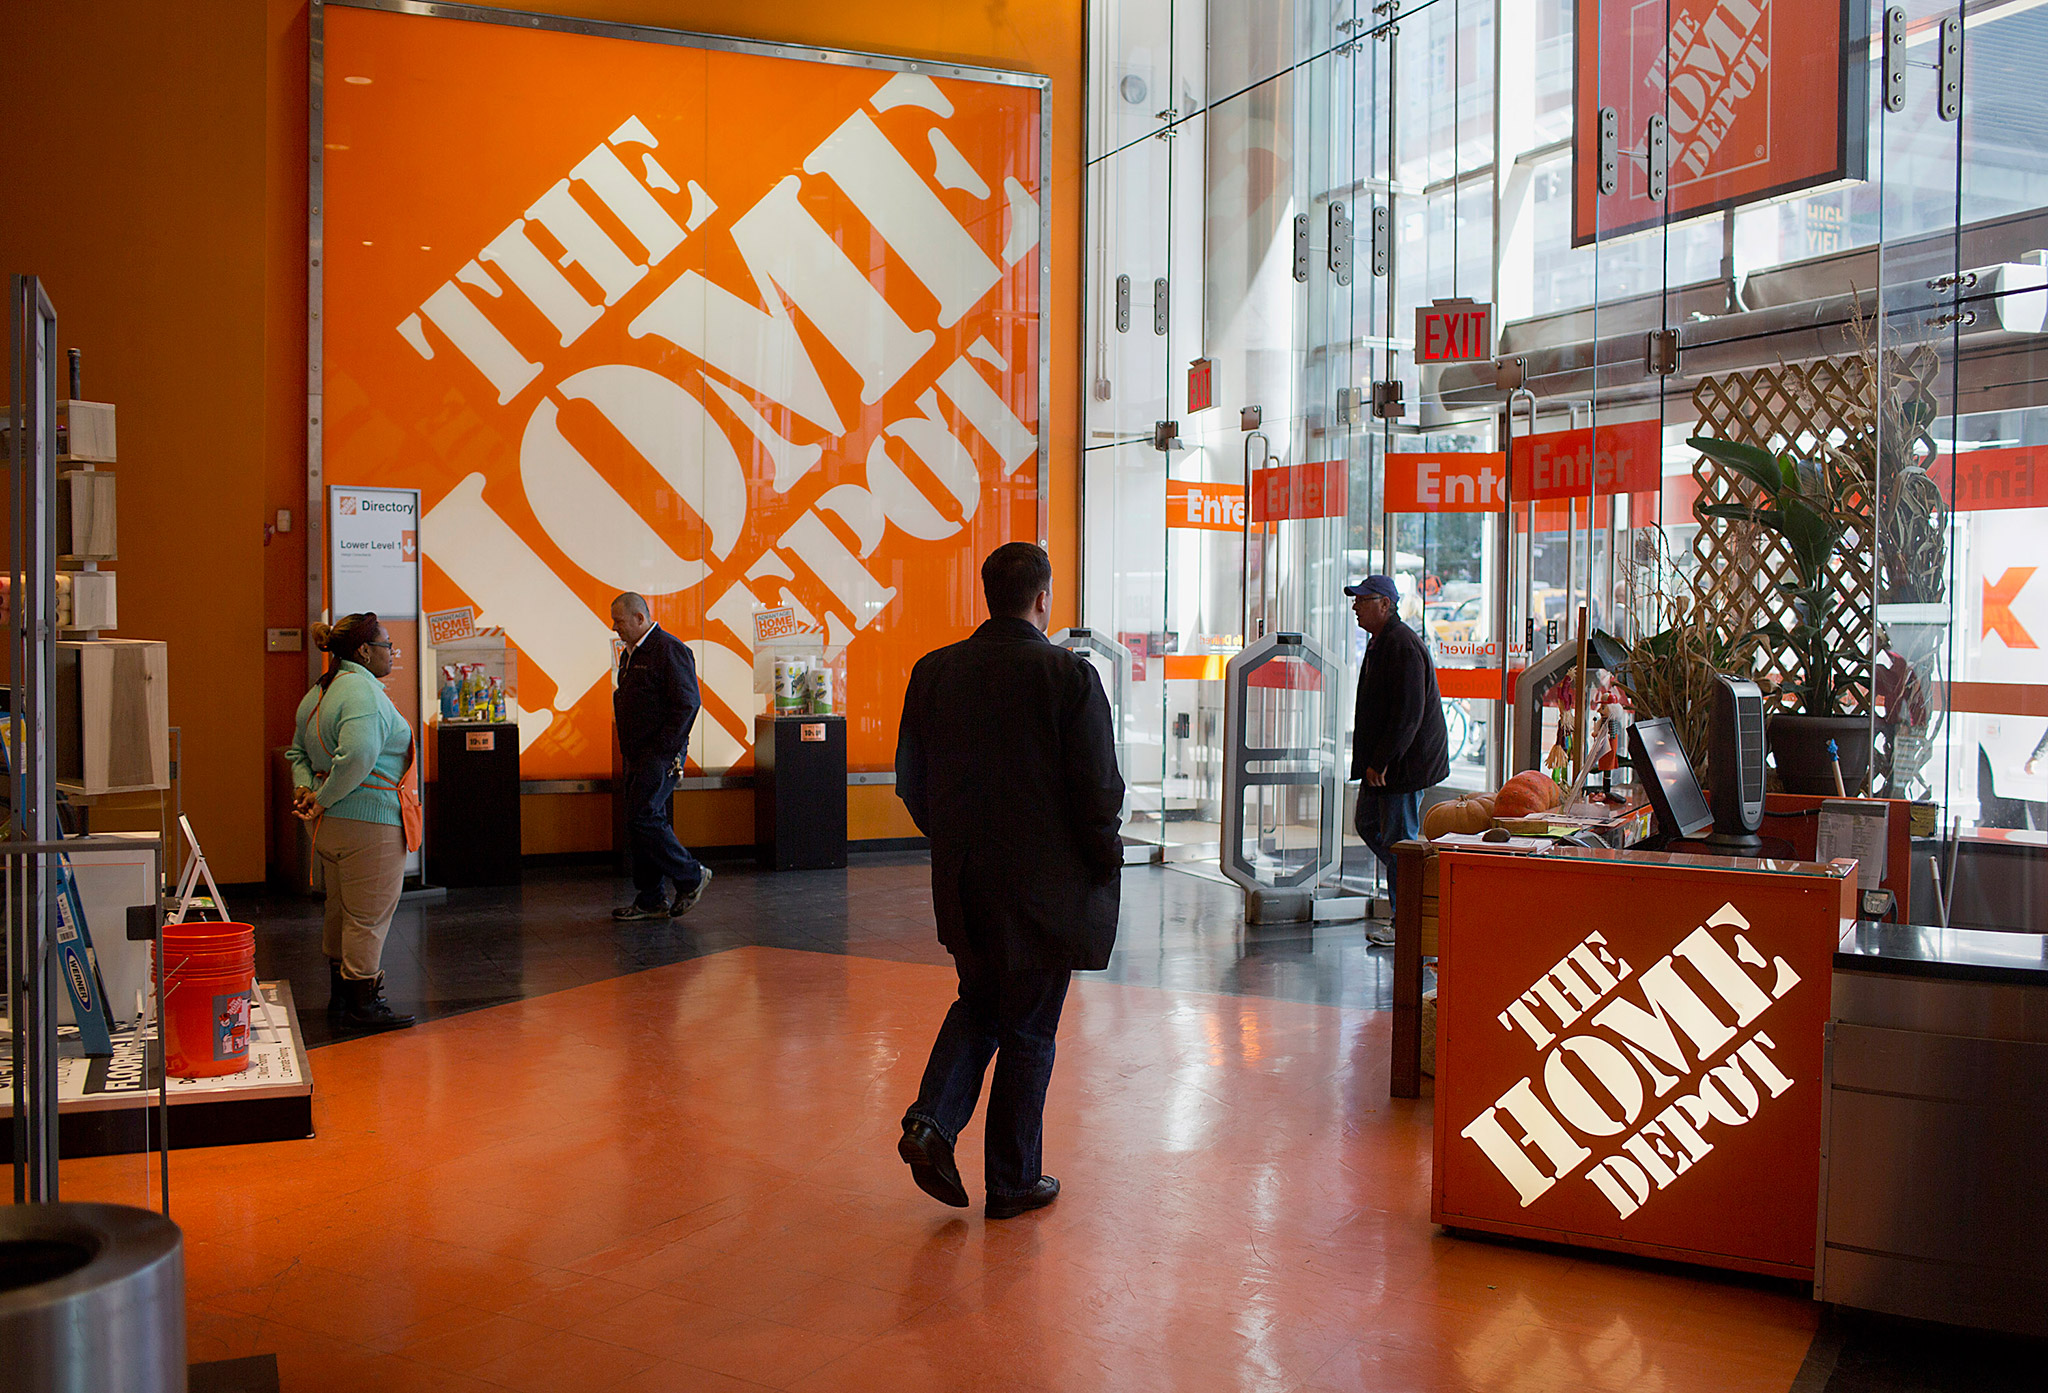 A Home Depot store in New York
